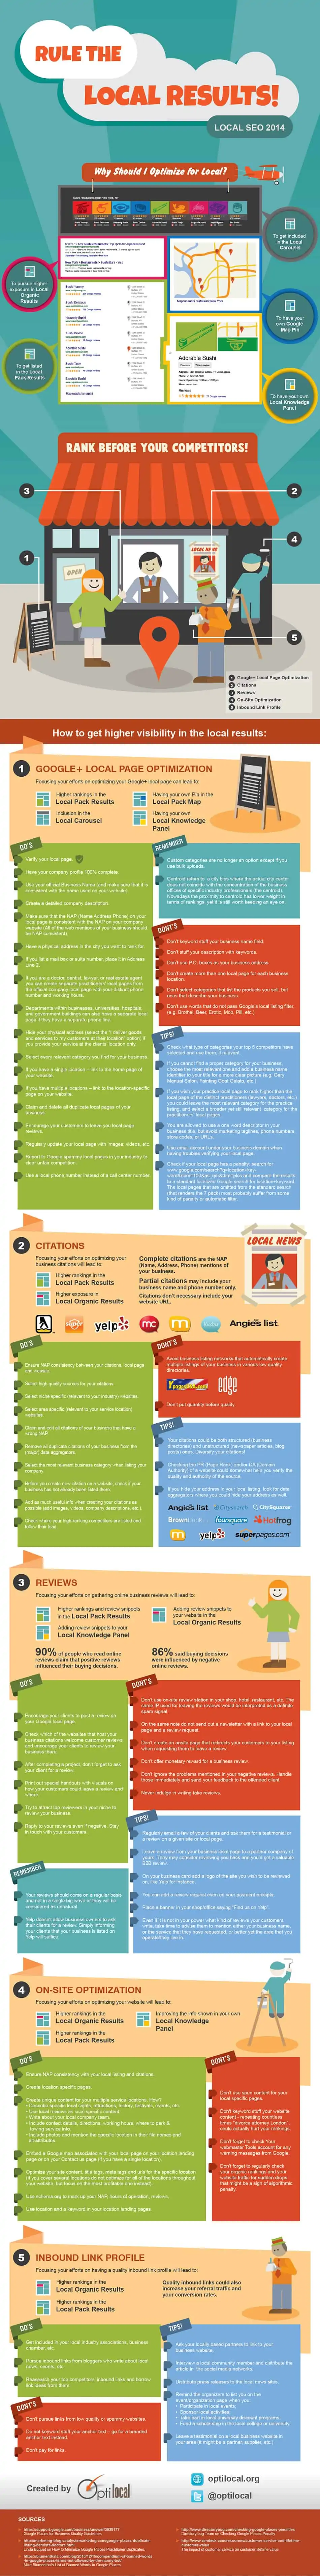 infographie-seo-local